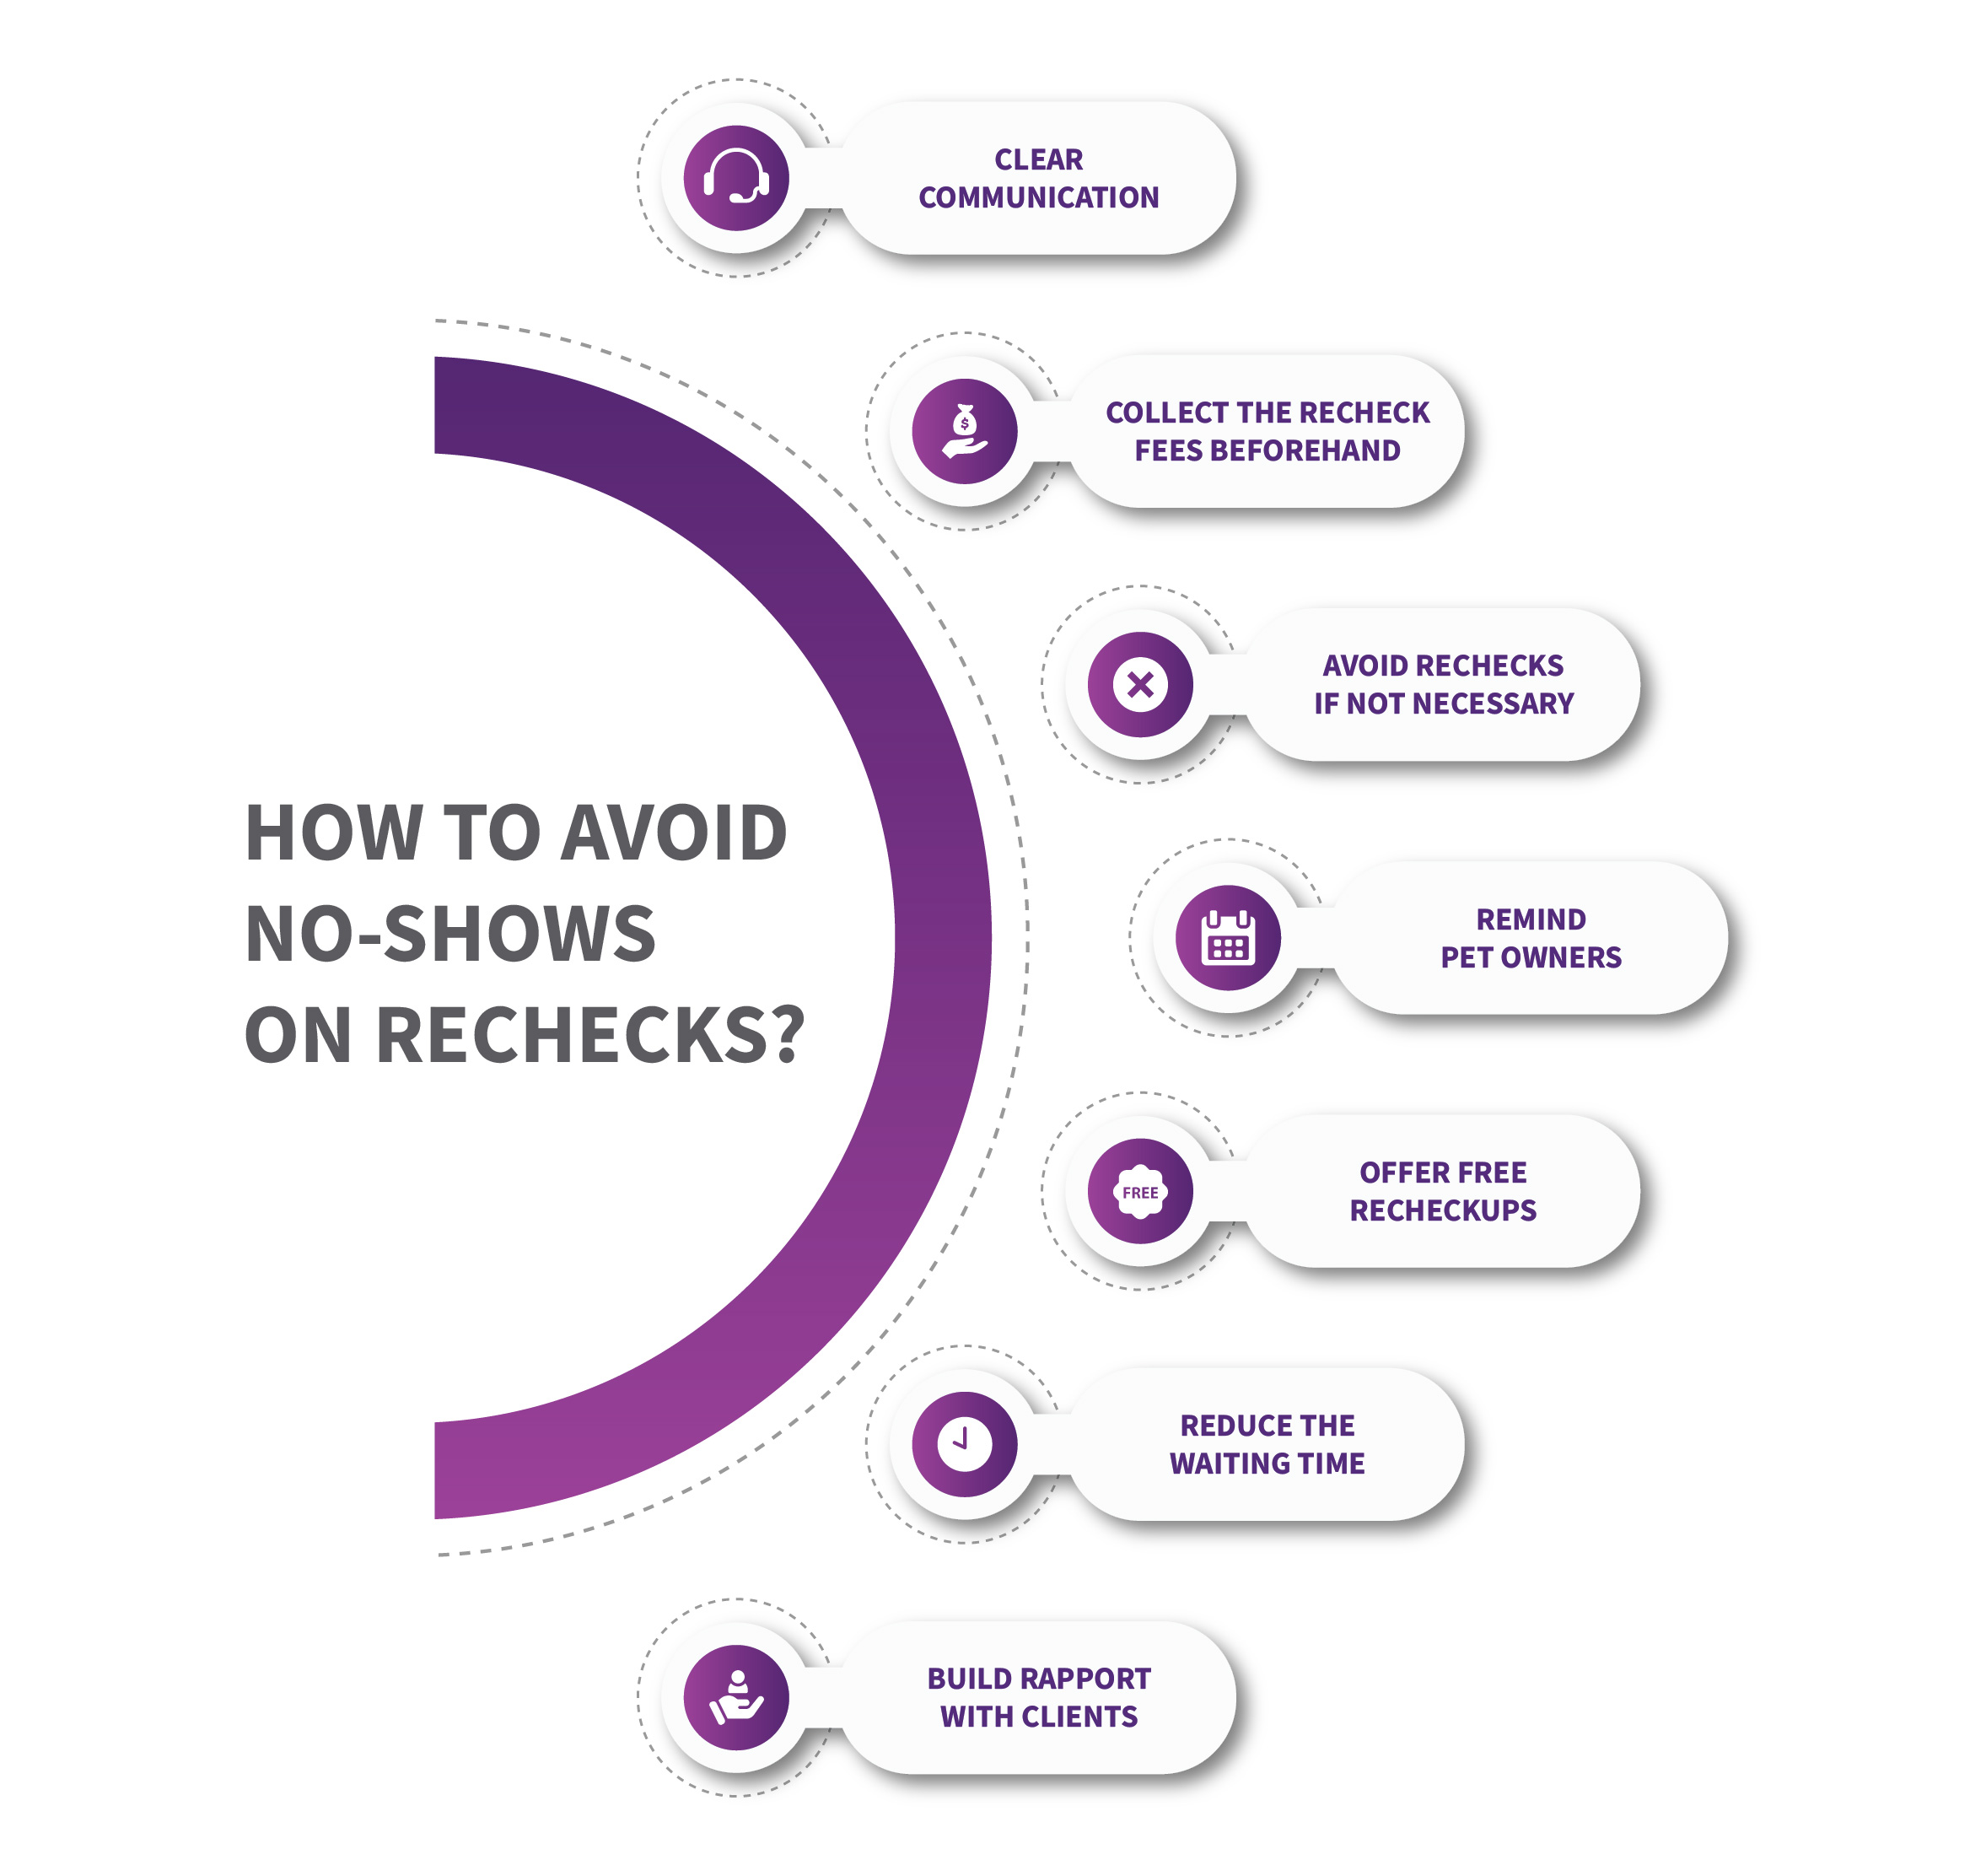 How to avoid No-Shows on Rechecks